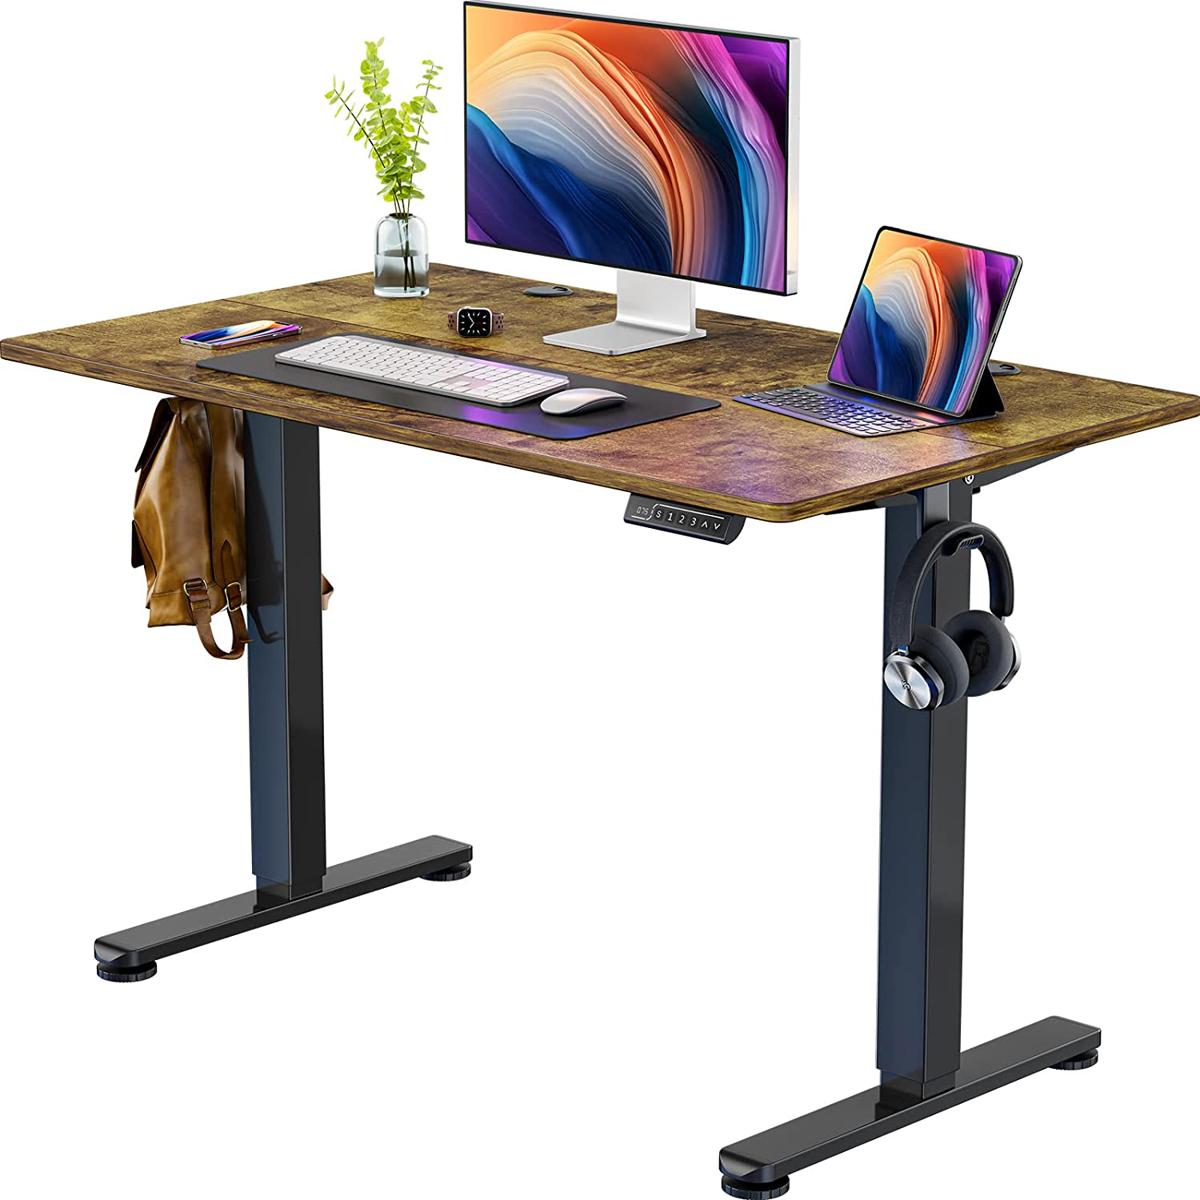 ErGear Height Adjustable Electric Standing Desk for $149.99 Shipped